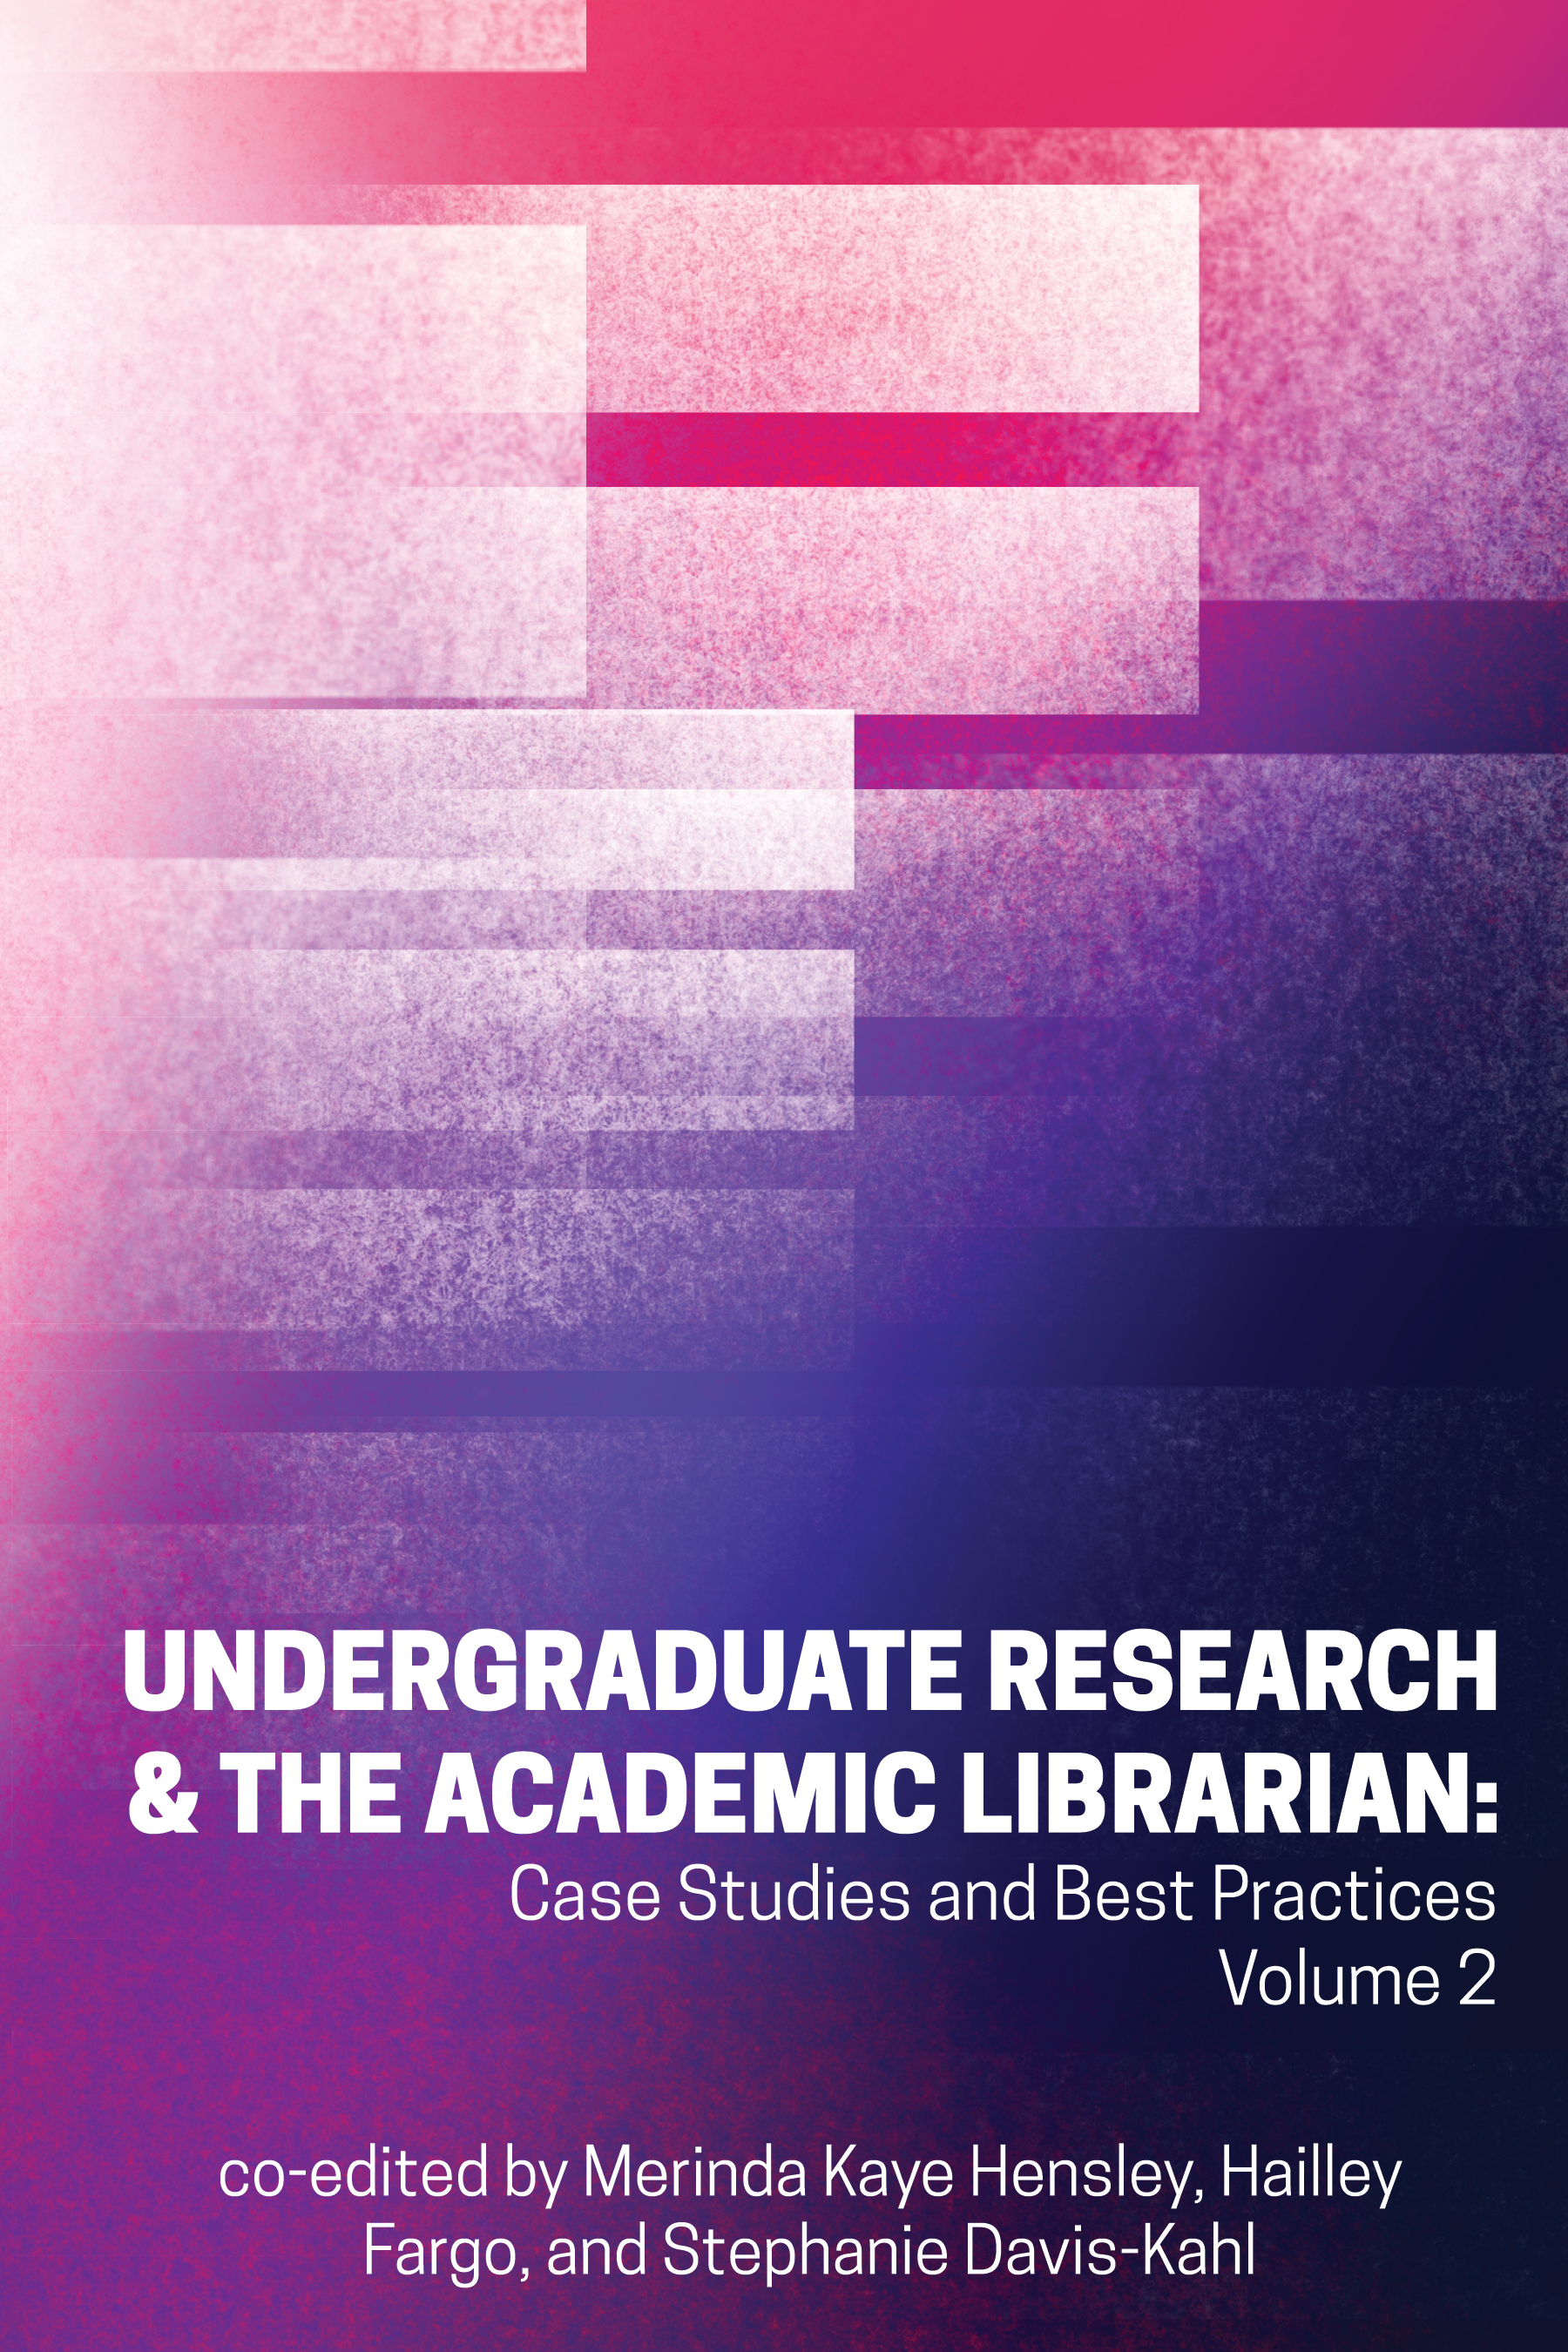 Undergraduate Research & the Academic Librarian: Case Studies and Best Practices, Volume 2